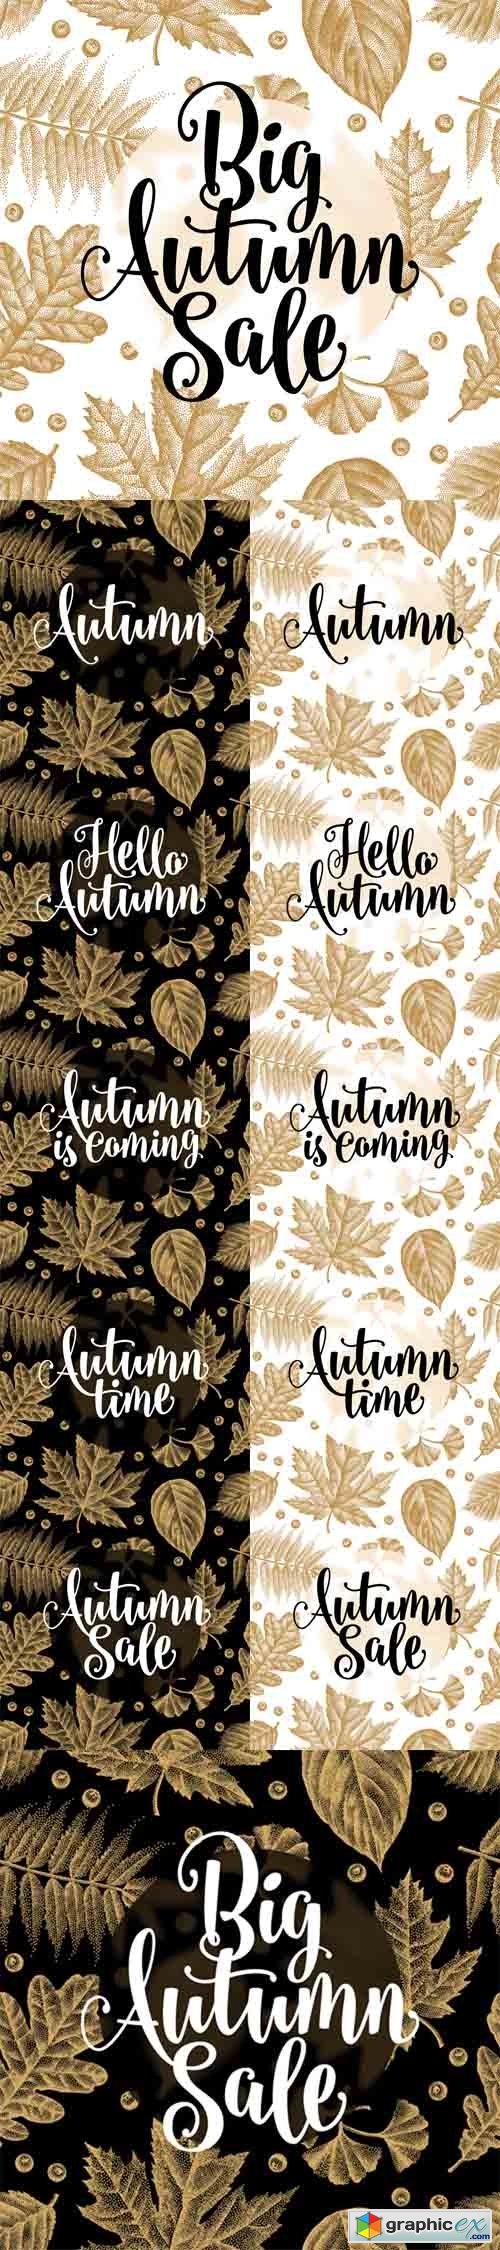 Autumn Sale Calligraphy Phrases on Leaves Background